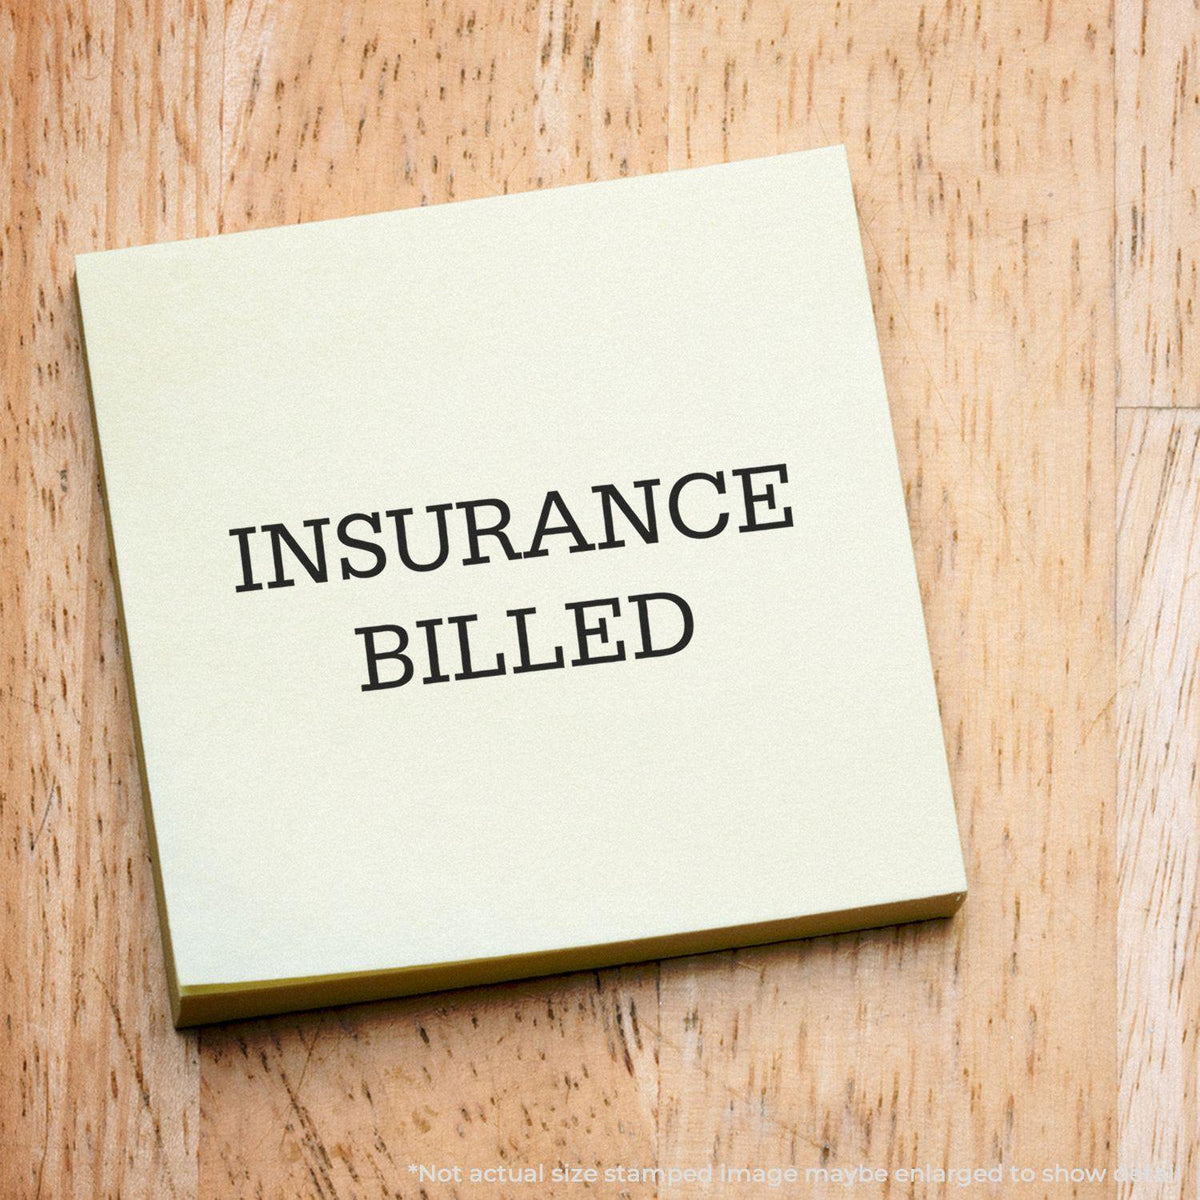 Large Insurance Billed Rubber Stamp In Use Photo